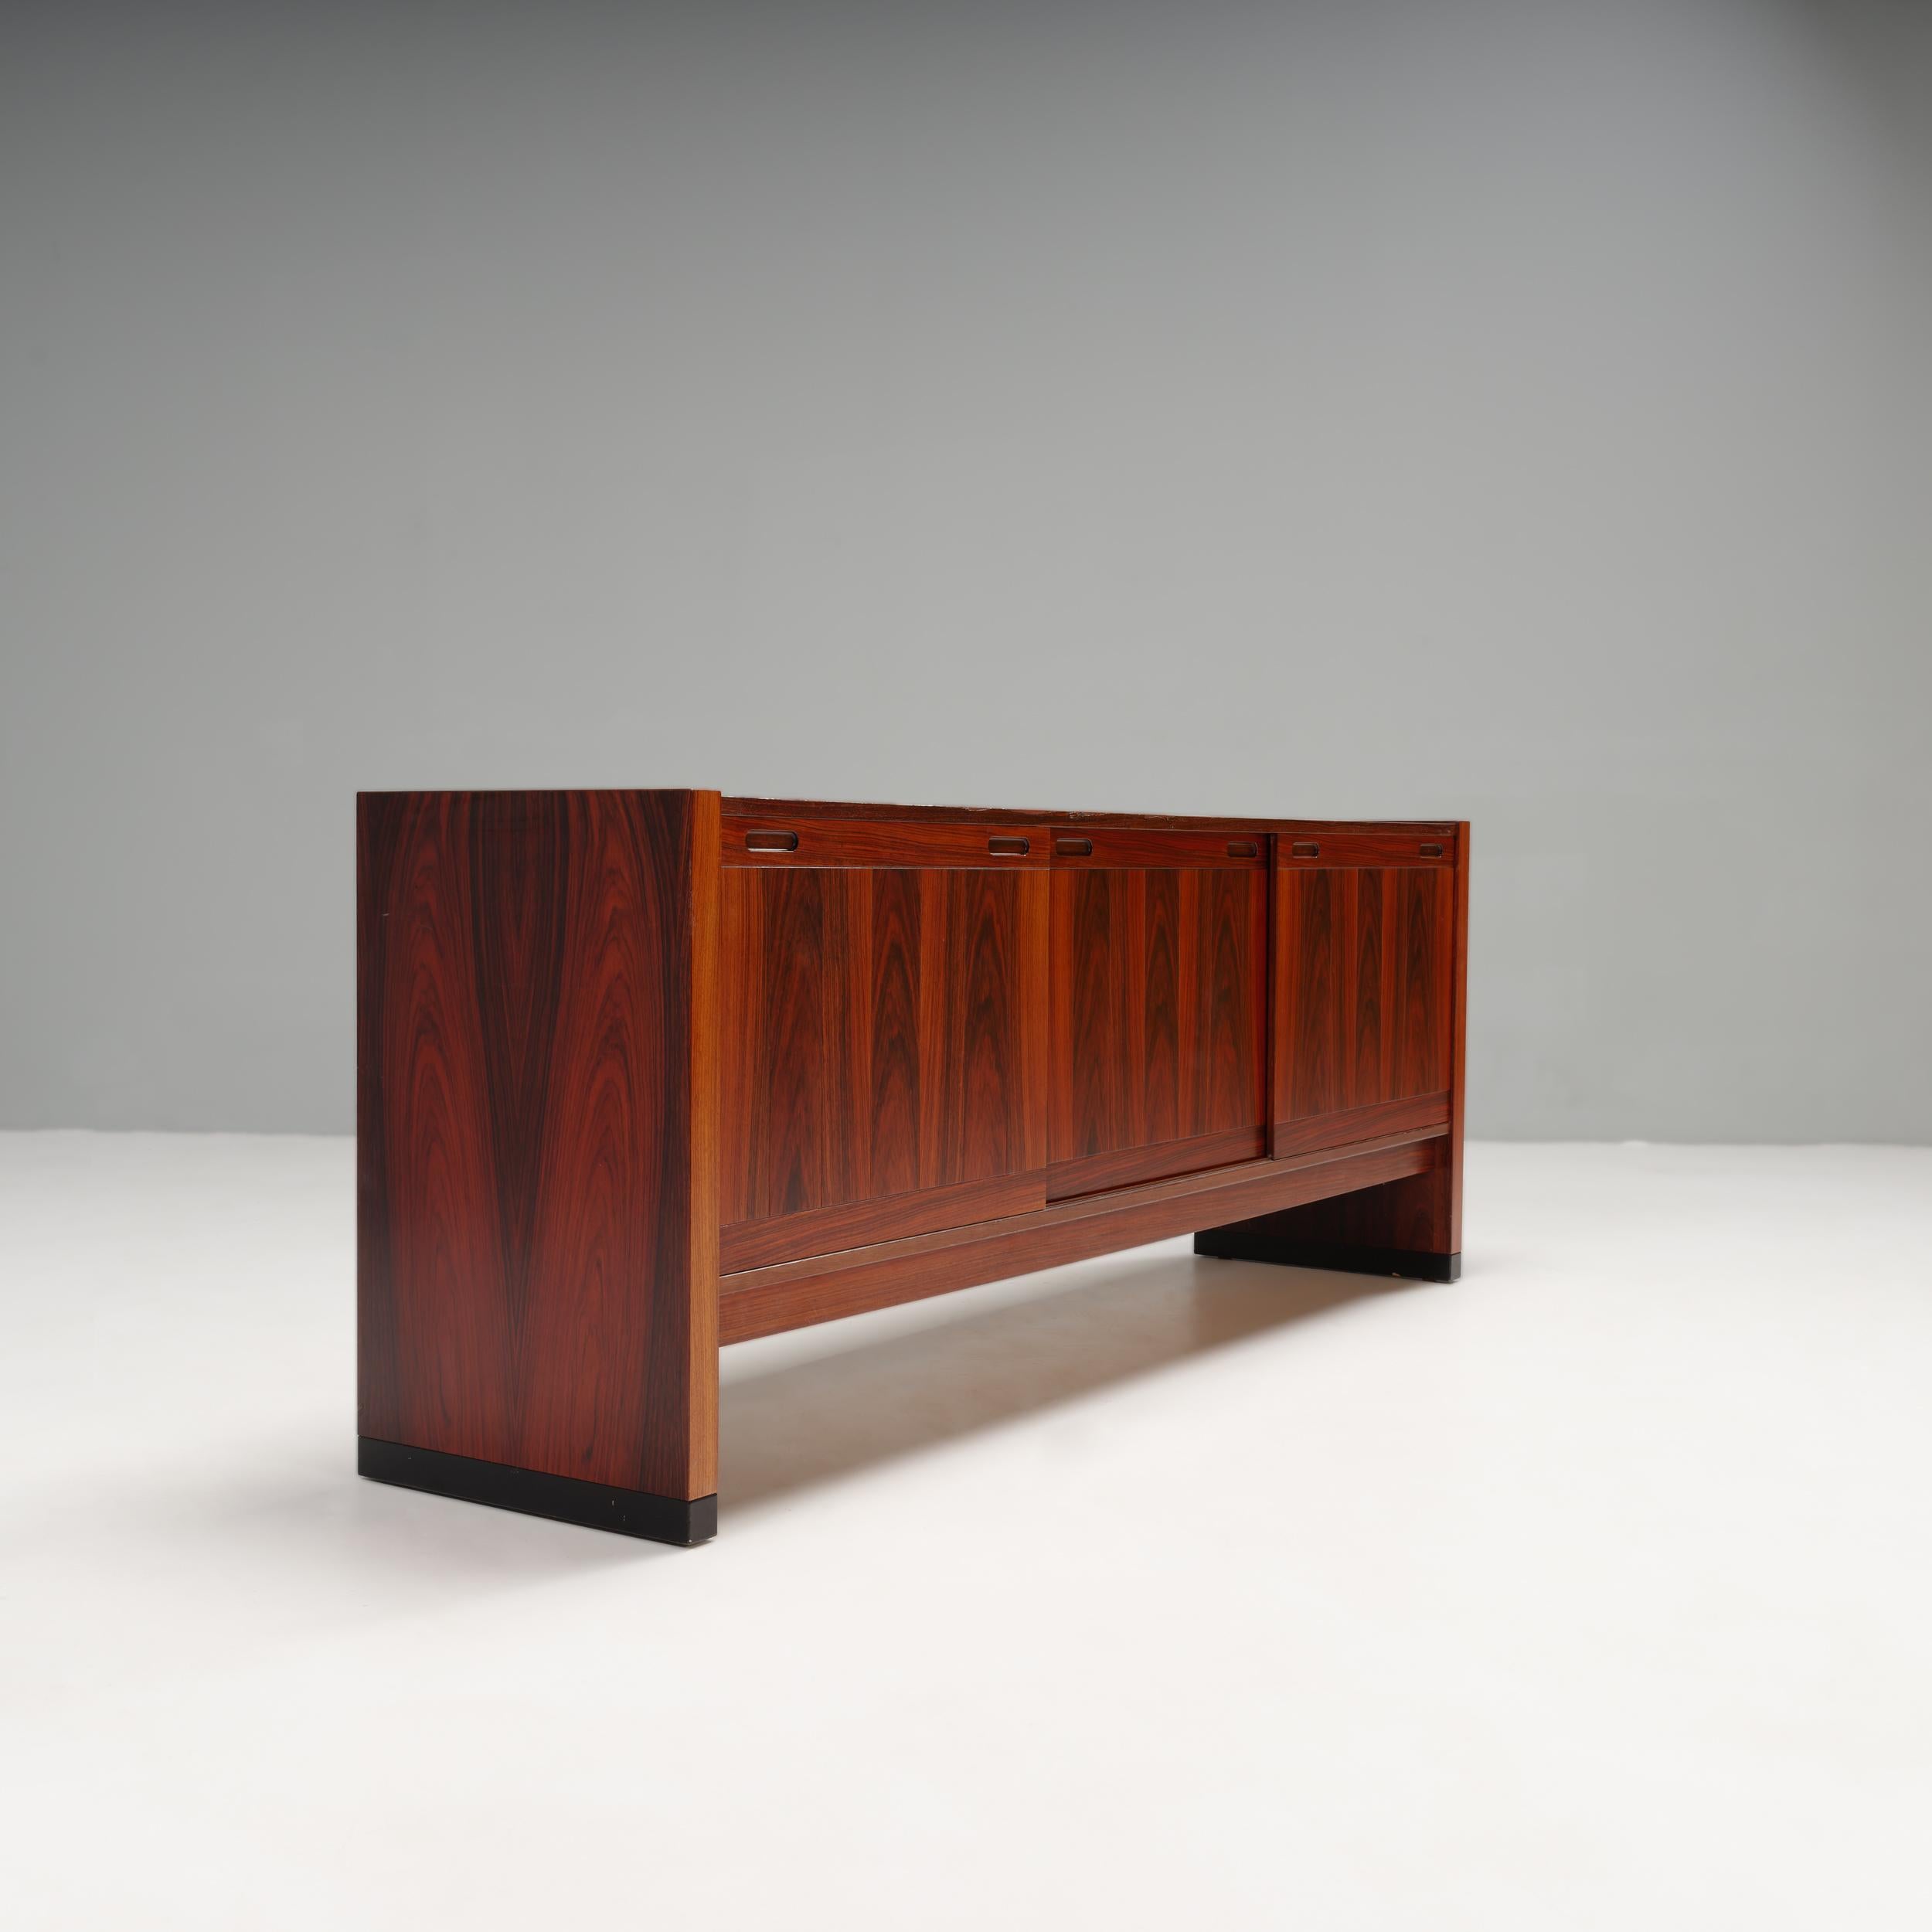 A fantastic example of Danish Mid-Century Modern design, this sideboard was made by renowned cabinet manufacturer Skovby.

Constructed from rosewood, the sideboard has a sleek, Minimalist aesthetic, making it ideal for displaying items along the